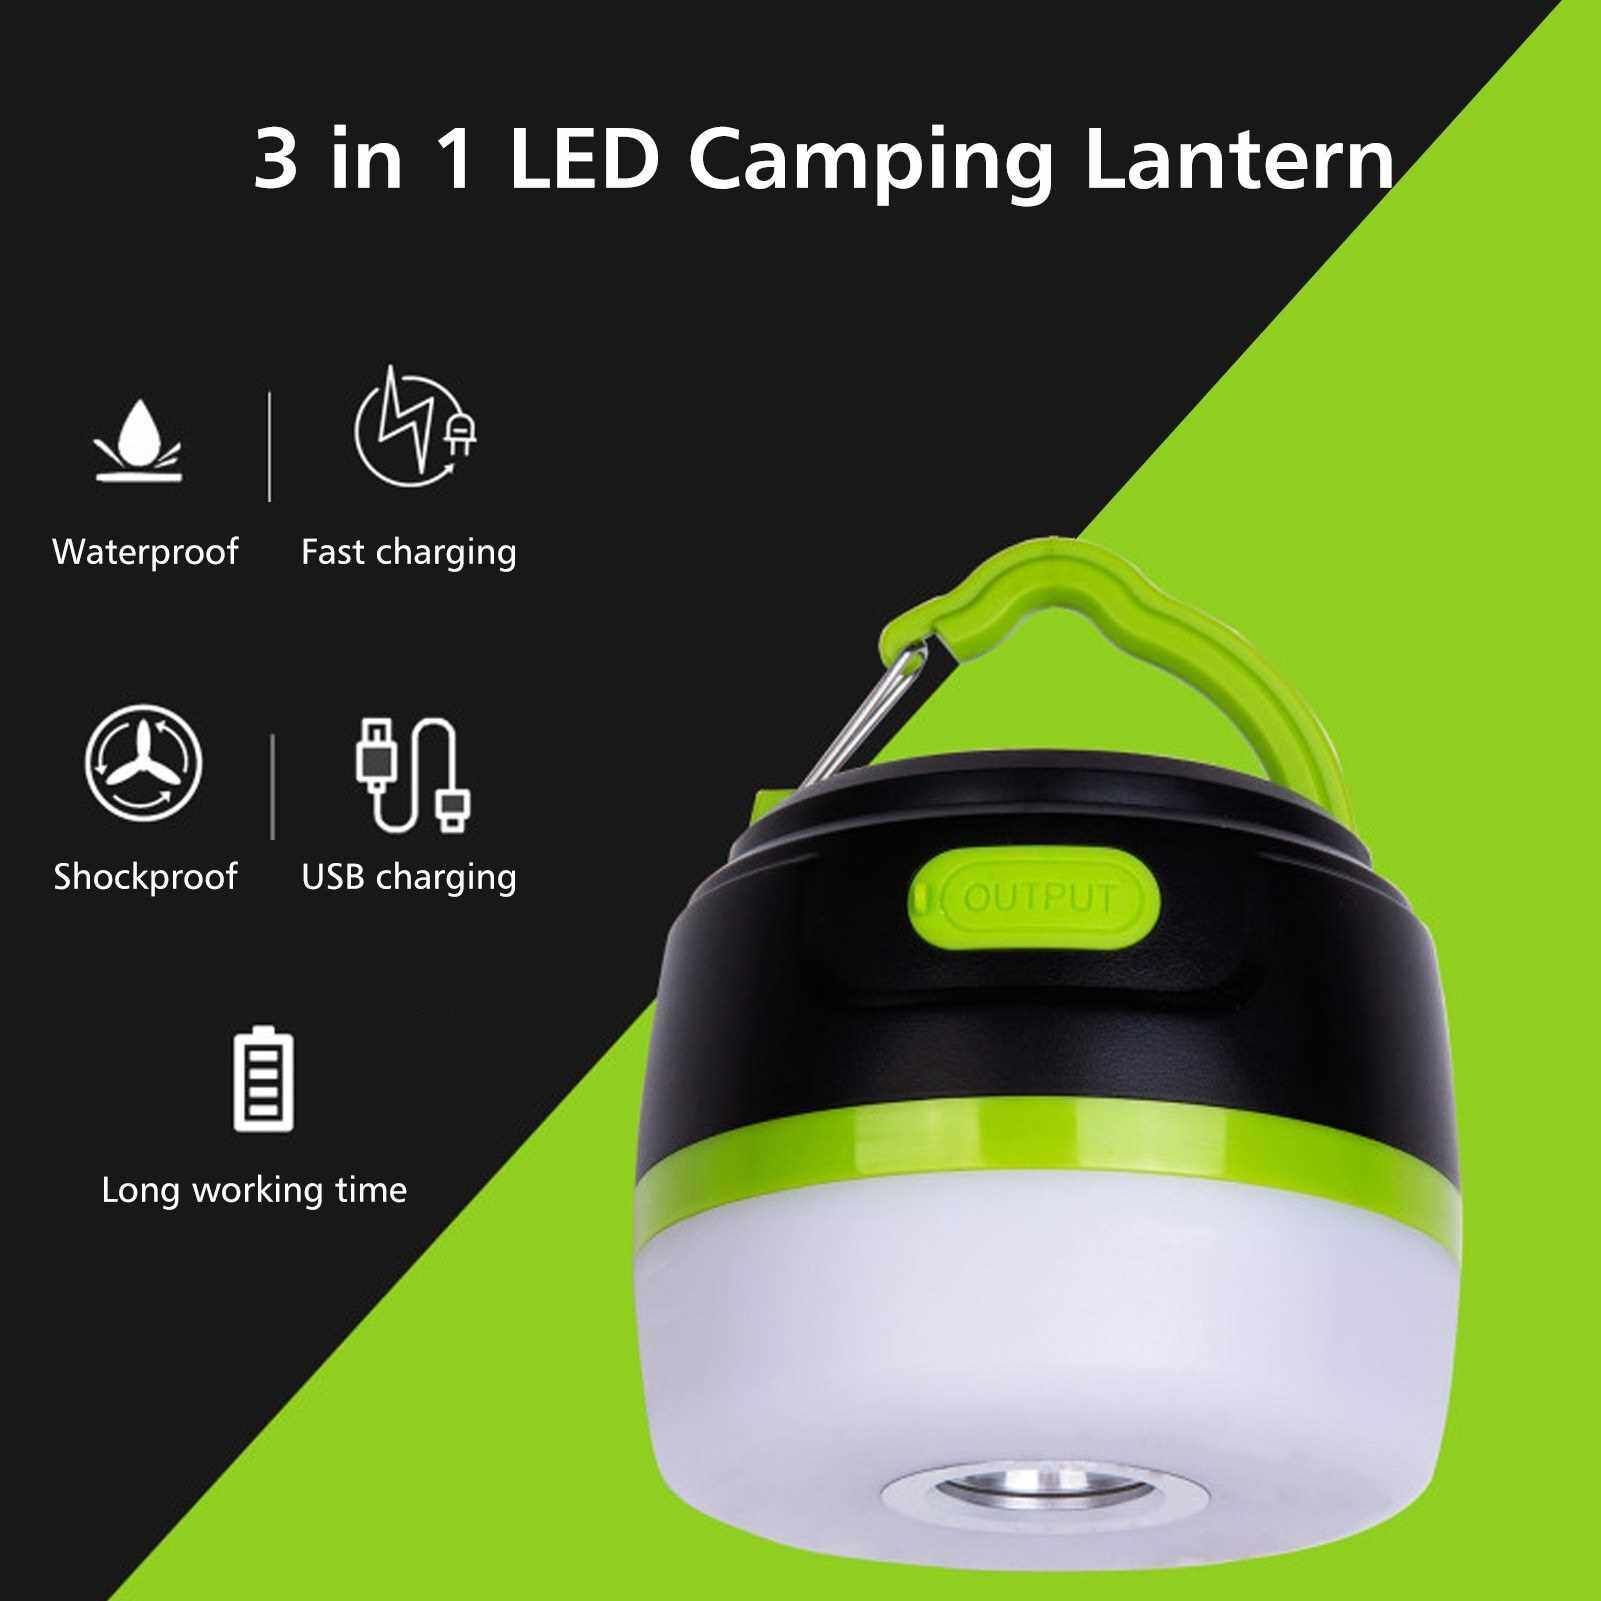 Best Selling Rechargeable LED Camping Lantern Portable USB Camping Tent Light Power Bank 5200mAh 3 in 1 Design IP65 waterproof Magnet Base 5 Light Modes - Survival Kit for Emergency Hurricane Power Outage (Standard)